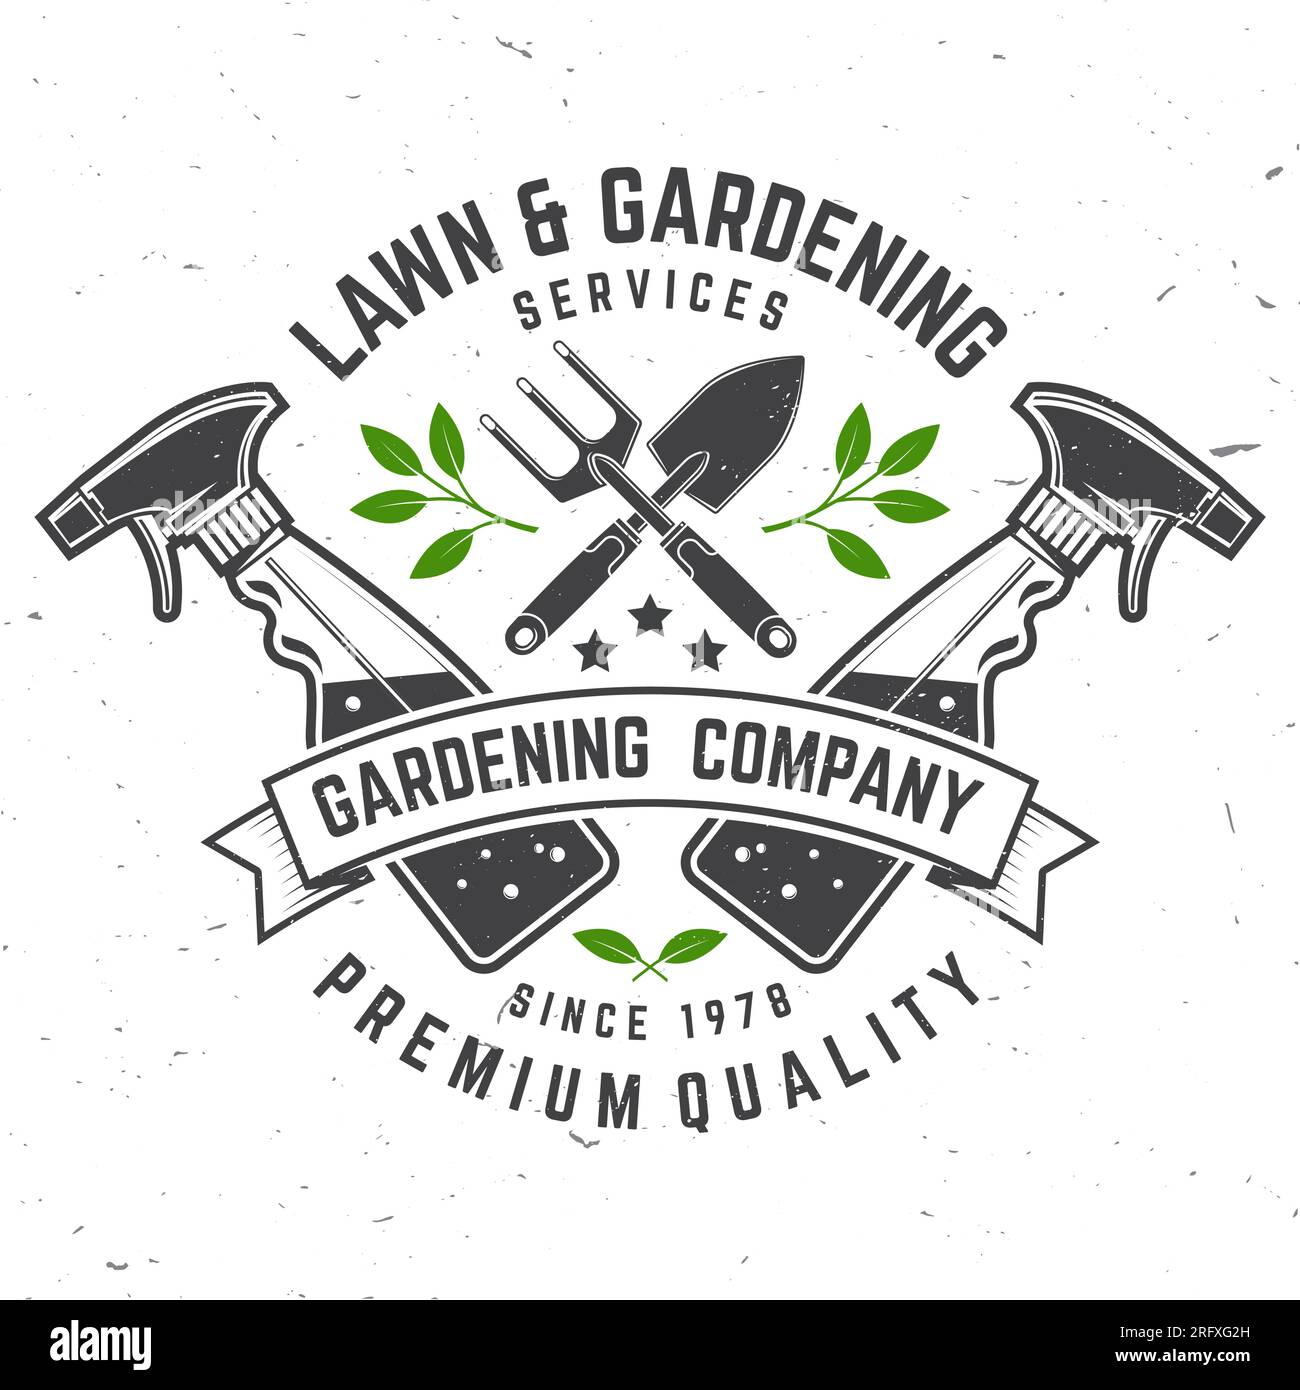 Lawn and Gardening services emblem, label, badge, logo. Vector illustration. For sign, patch, shirt design with hand garden trowel, farming fork Stock Vector